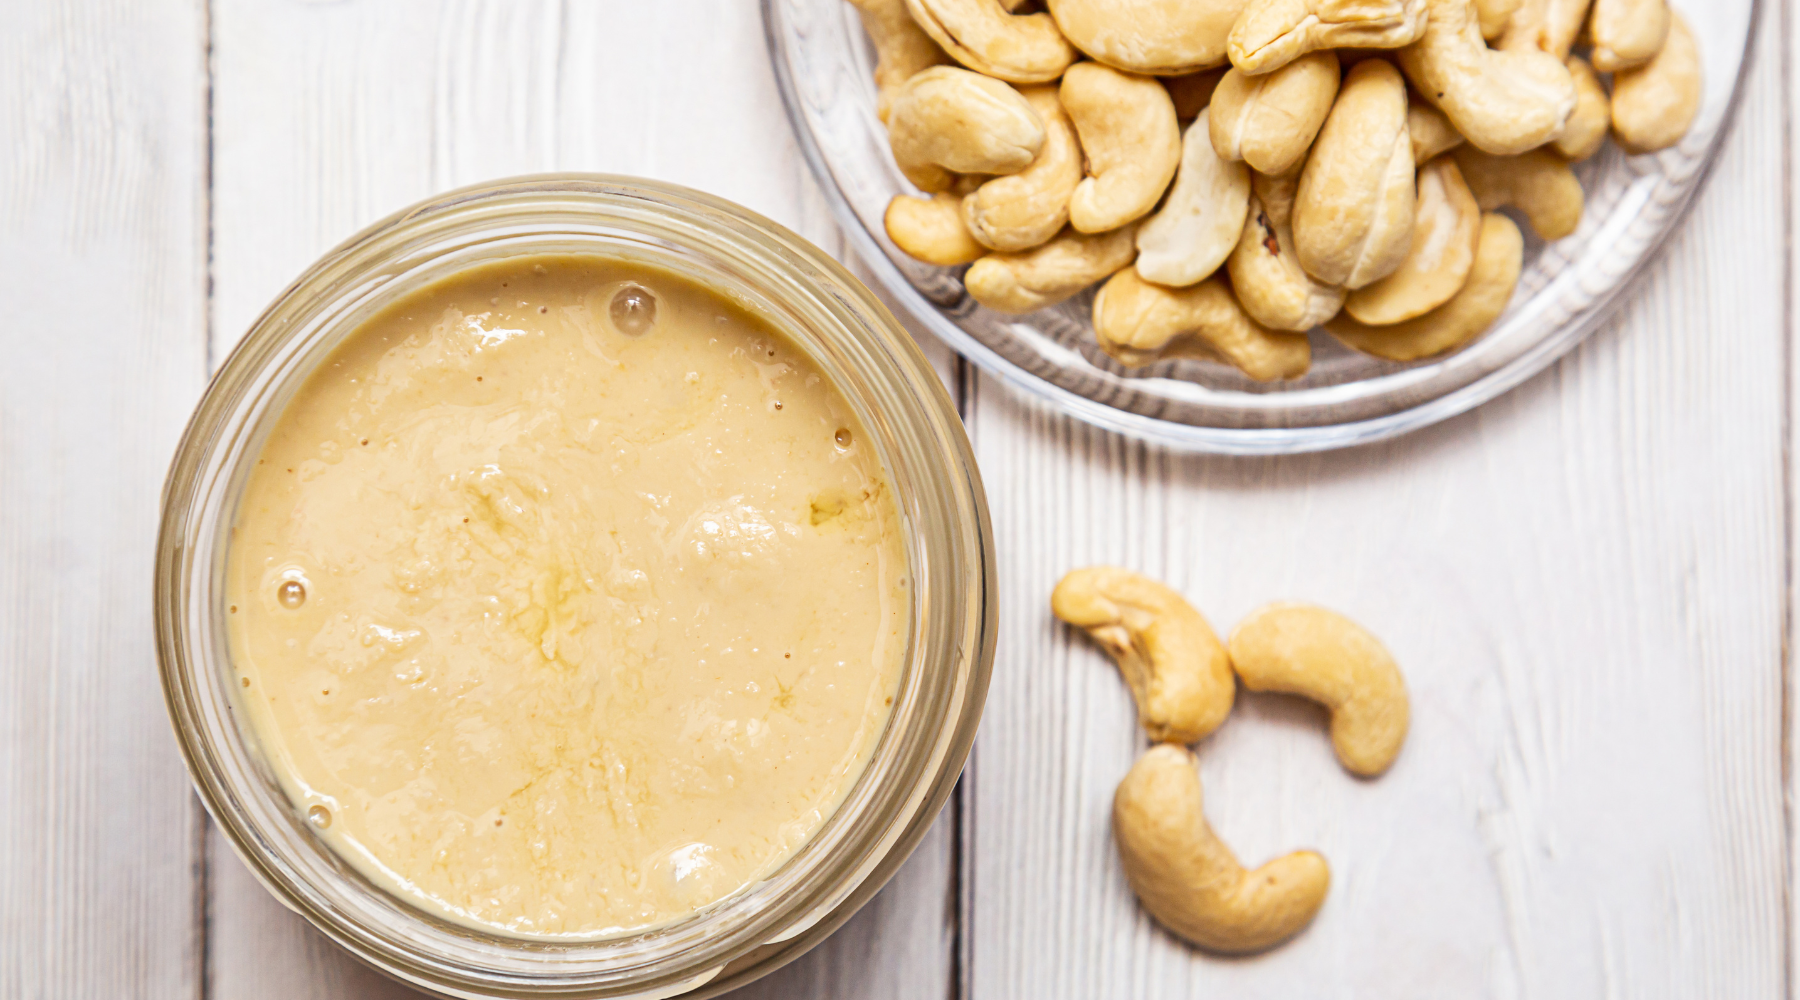 Cashew butter: A creamy spread made from roasted cashews. Perfect for toast, smoothies, or as a dip.